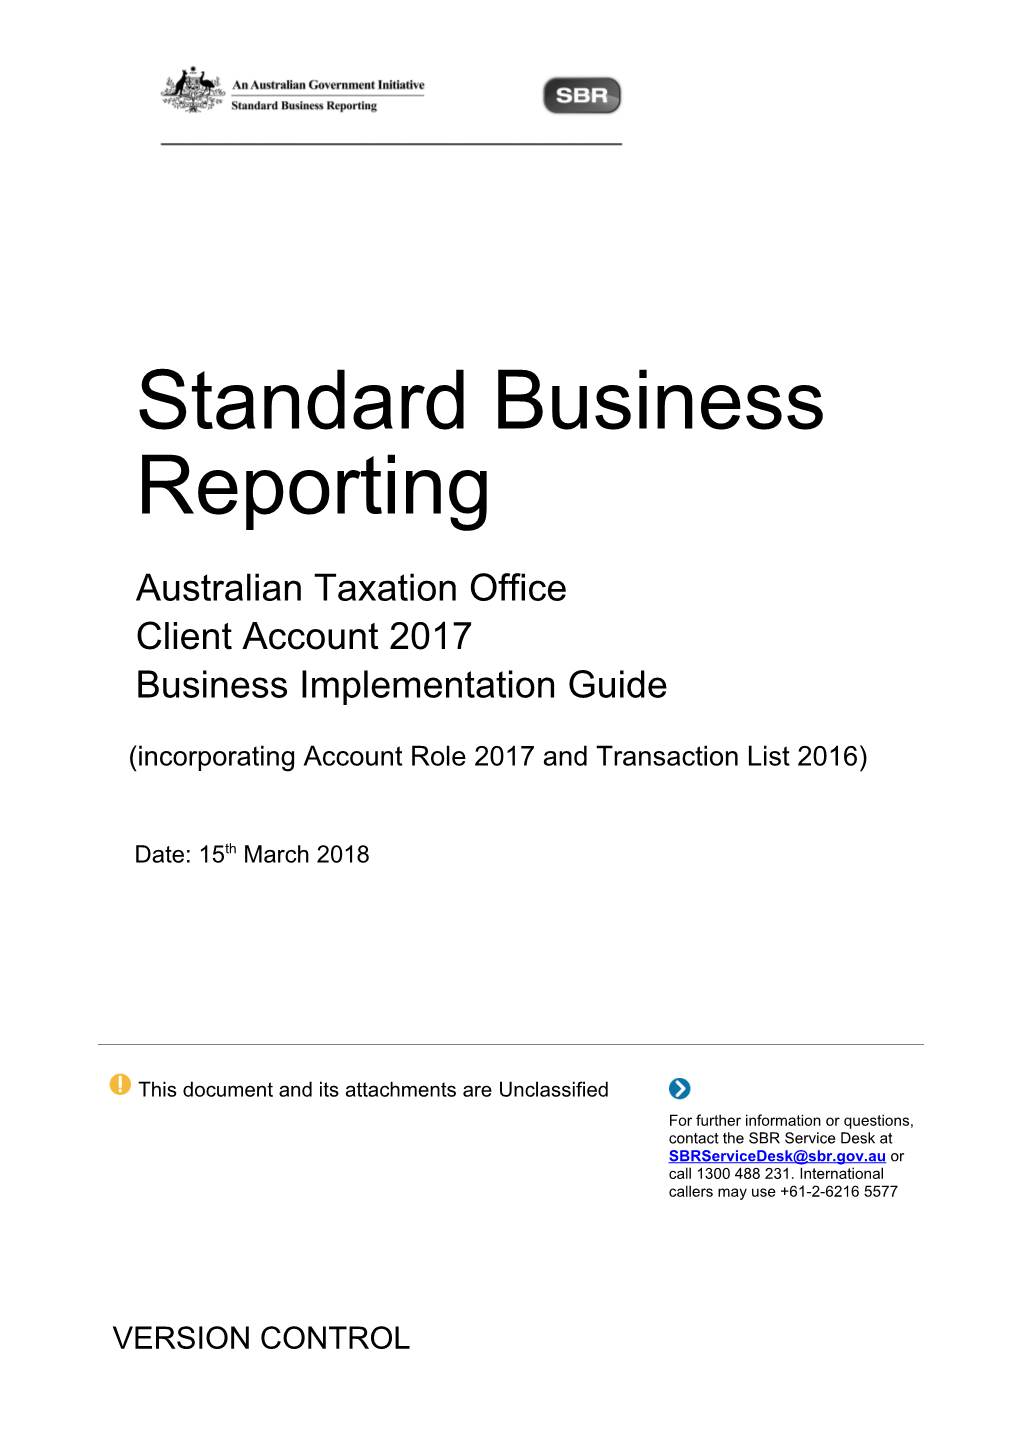 Standard Business Reporting ATO Client Account Business Implementation Guide